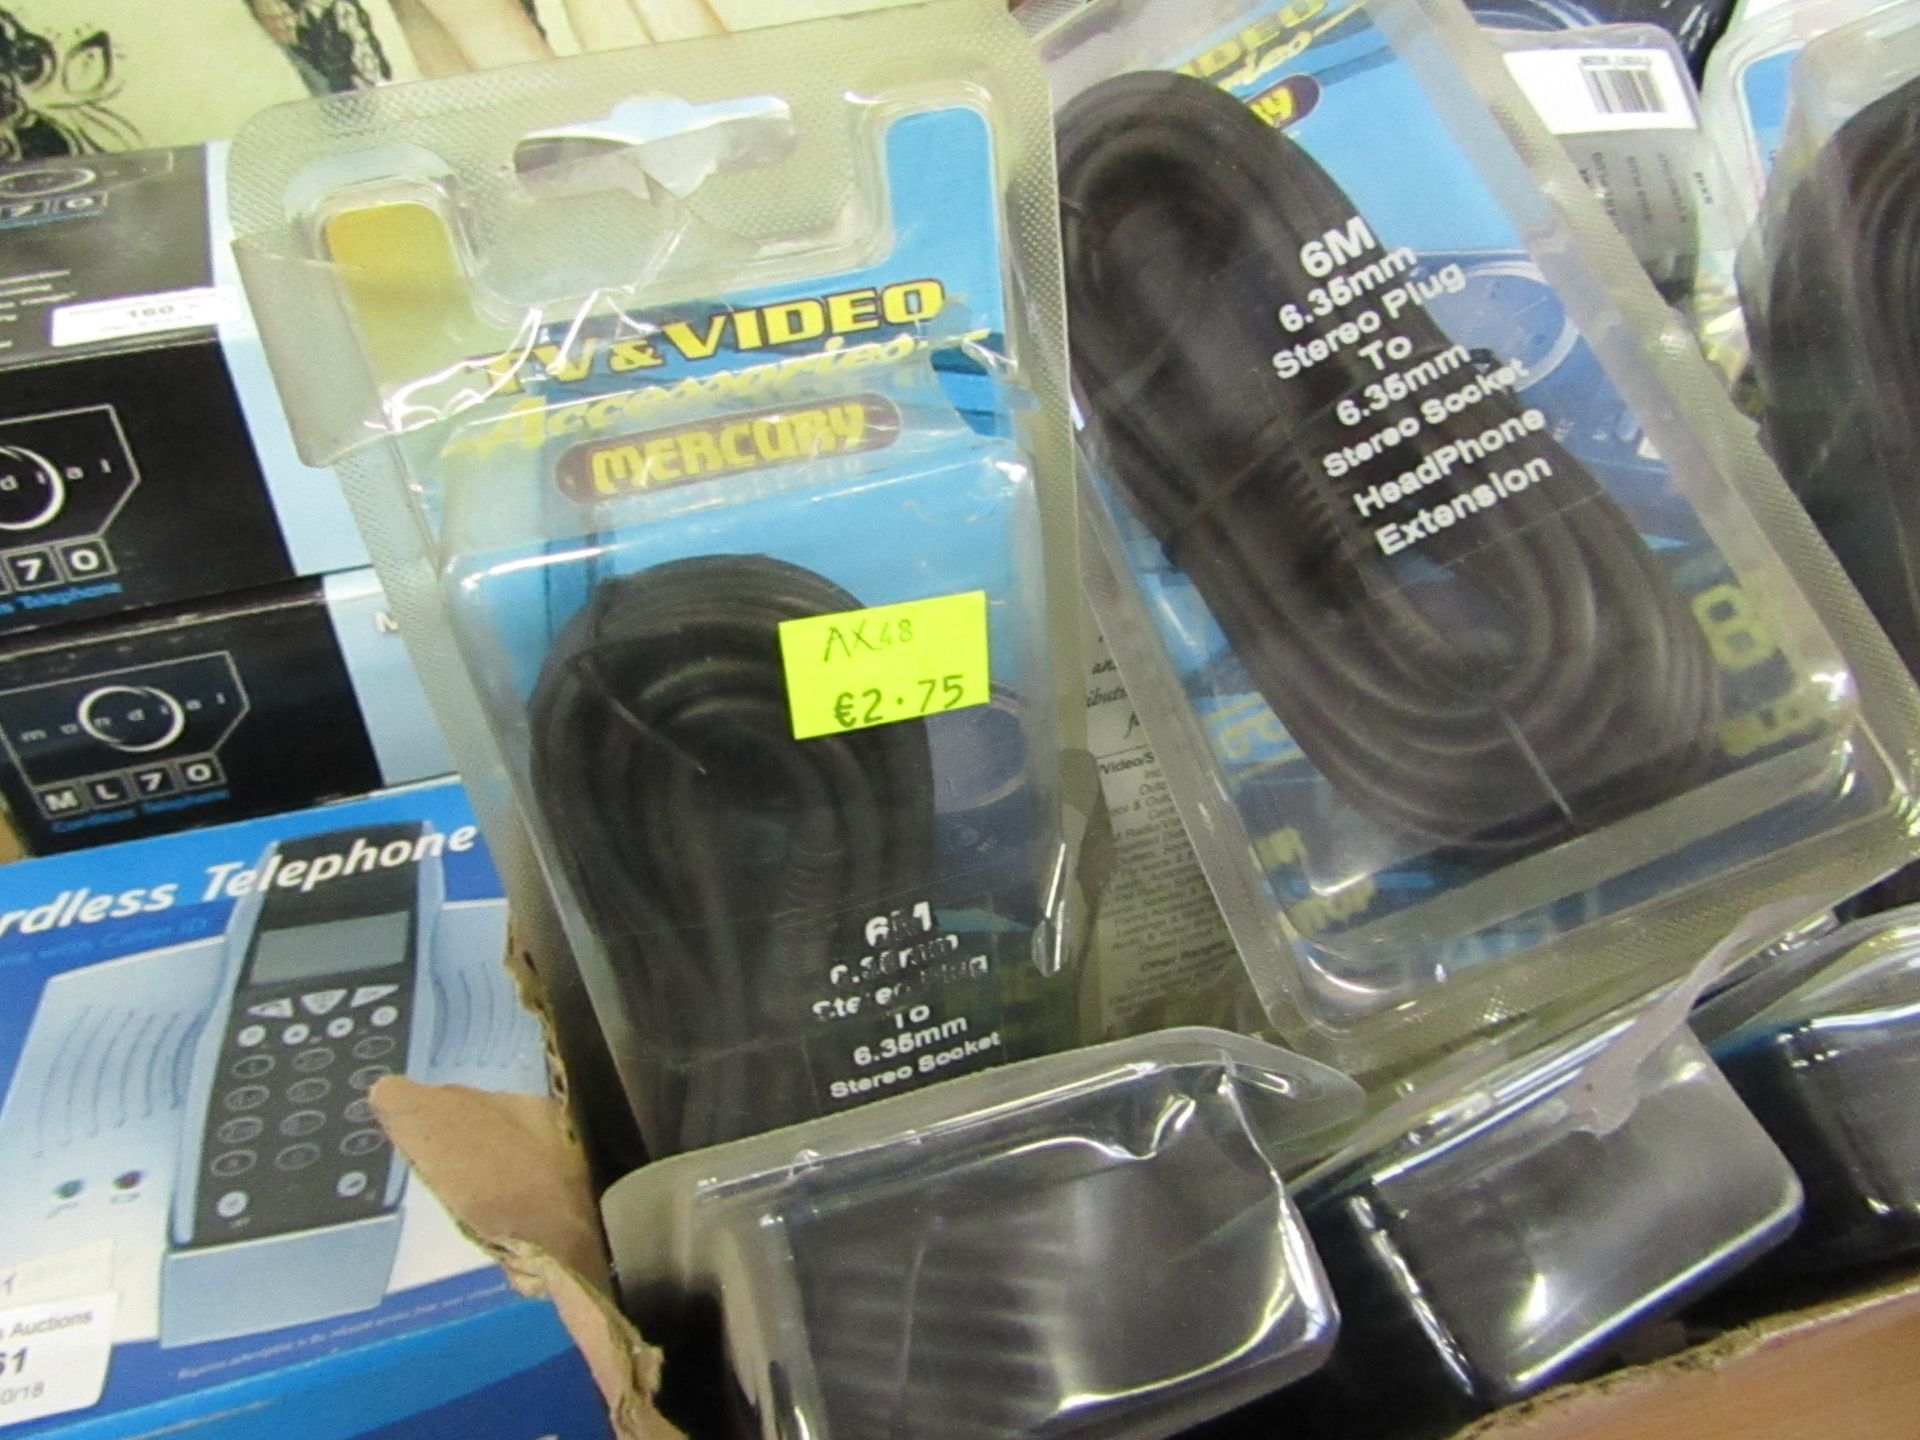 6x 6M 6.35mm stereo plug to 6.35mm stereo socket headphone extension cables. All new in packaging.